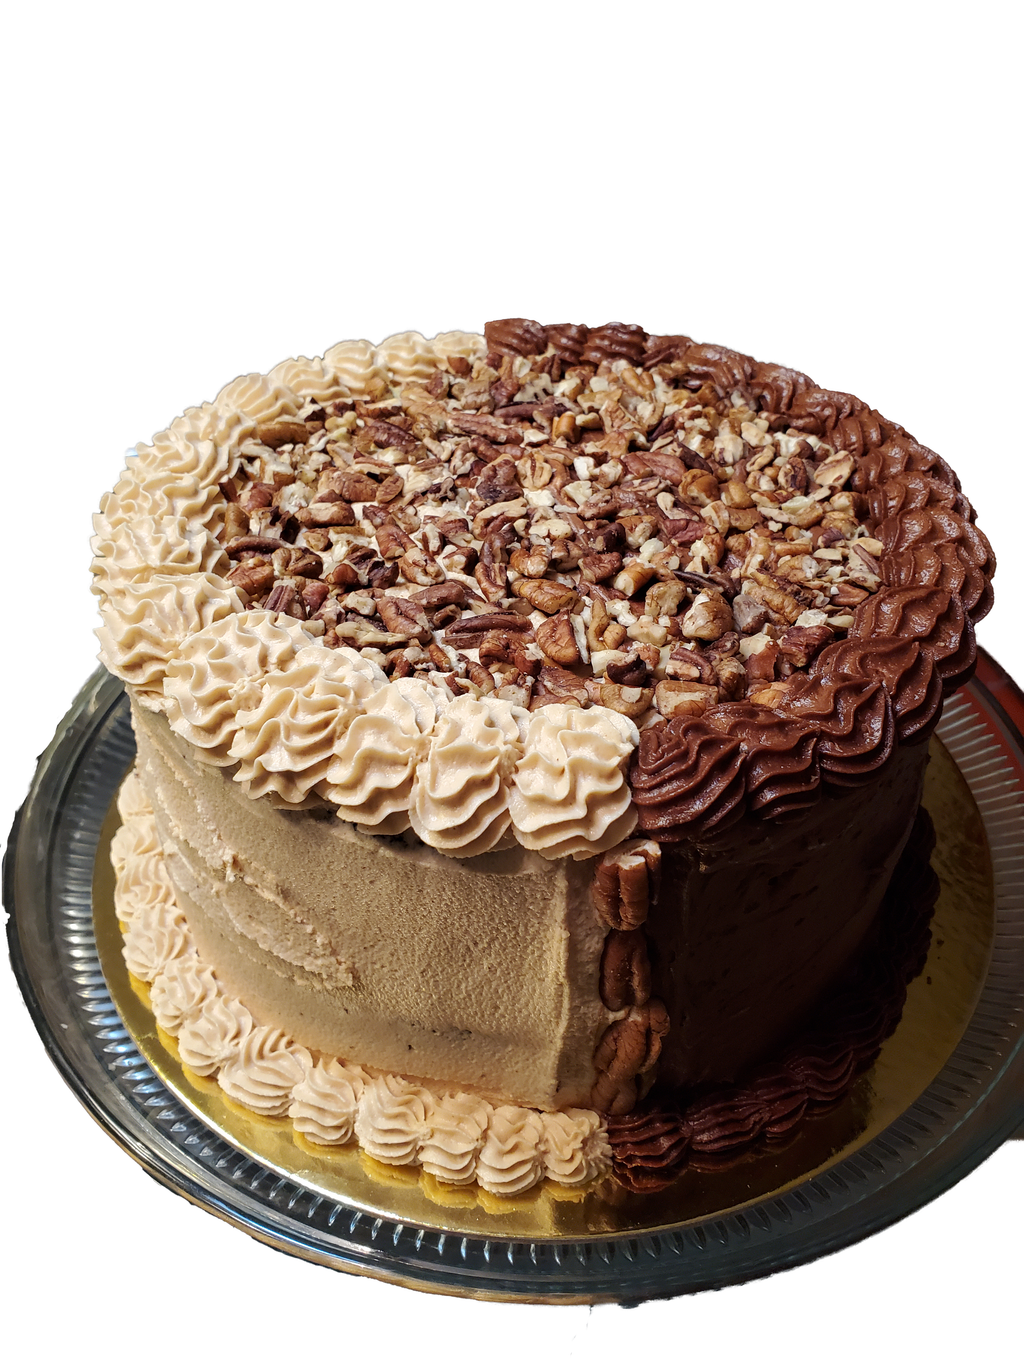 9 inch Peanut Butter Cake with chocolate icing